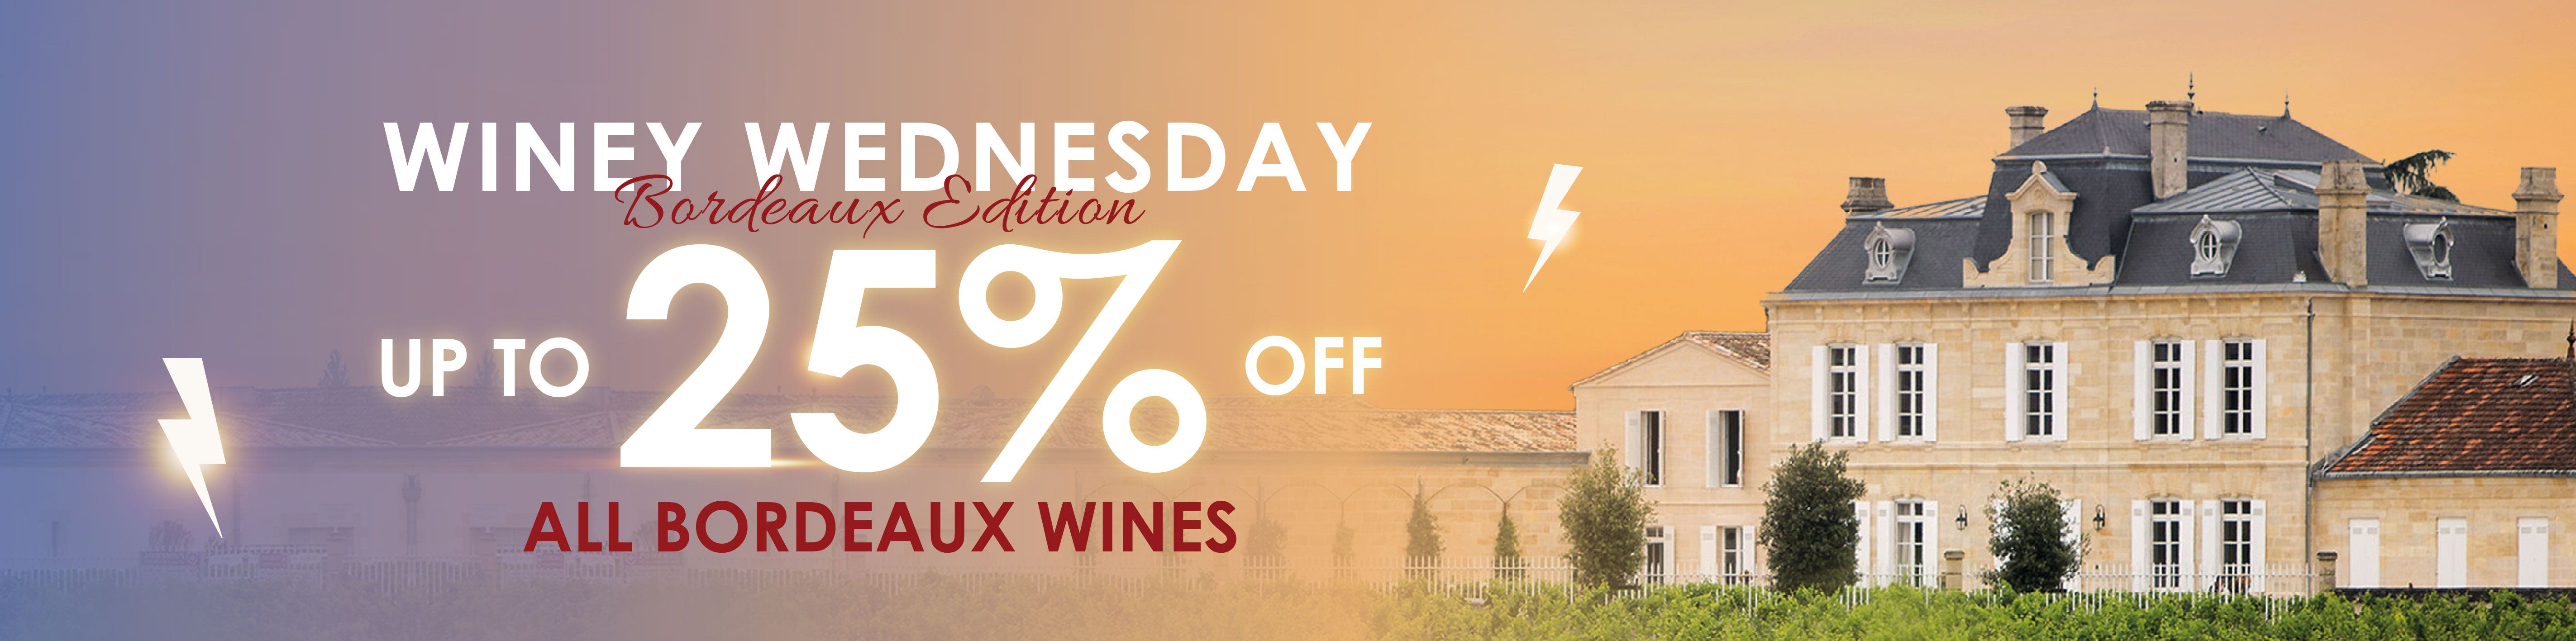 UP TO 25% OFF ALL BORDEAUX WINES